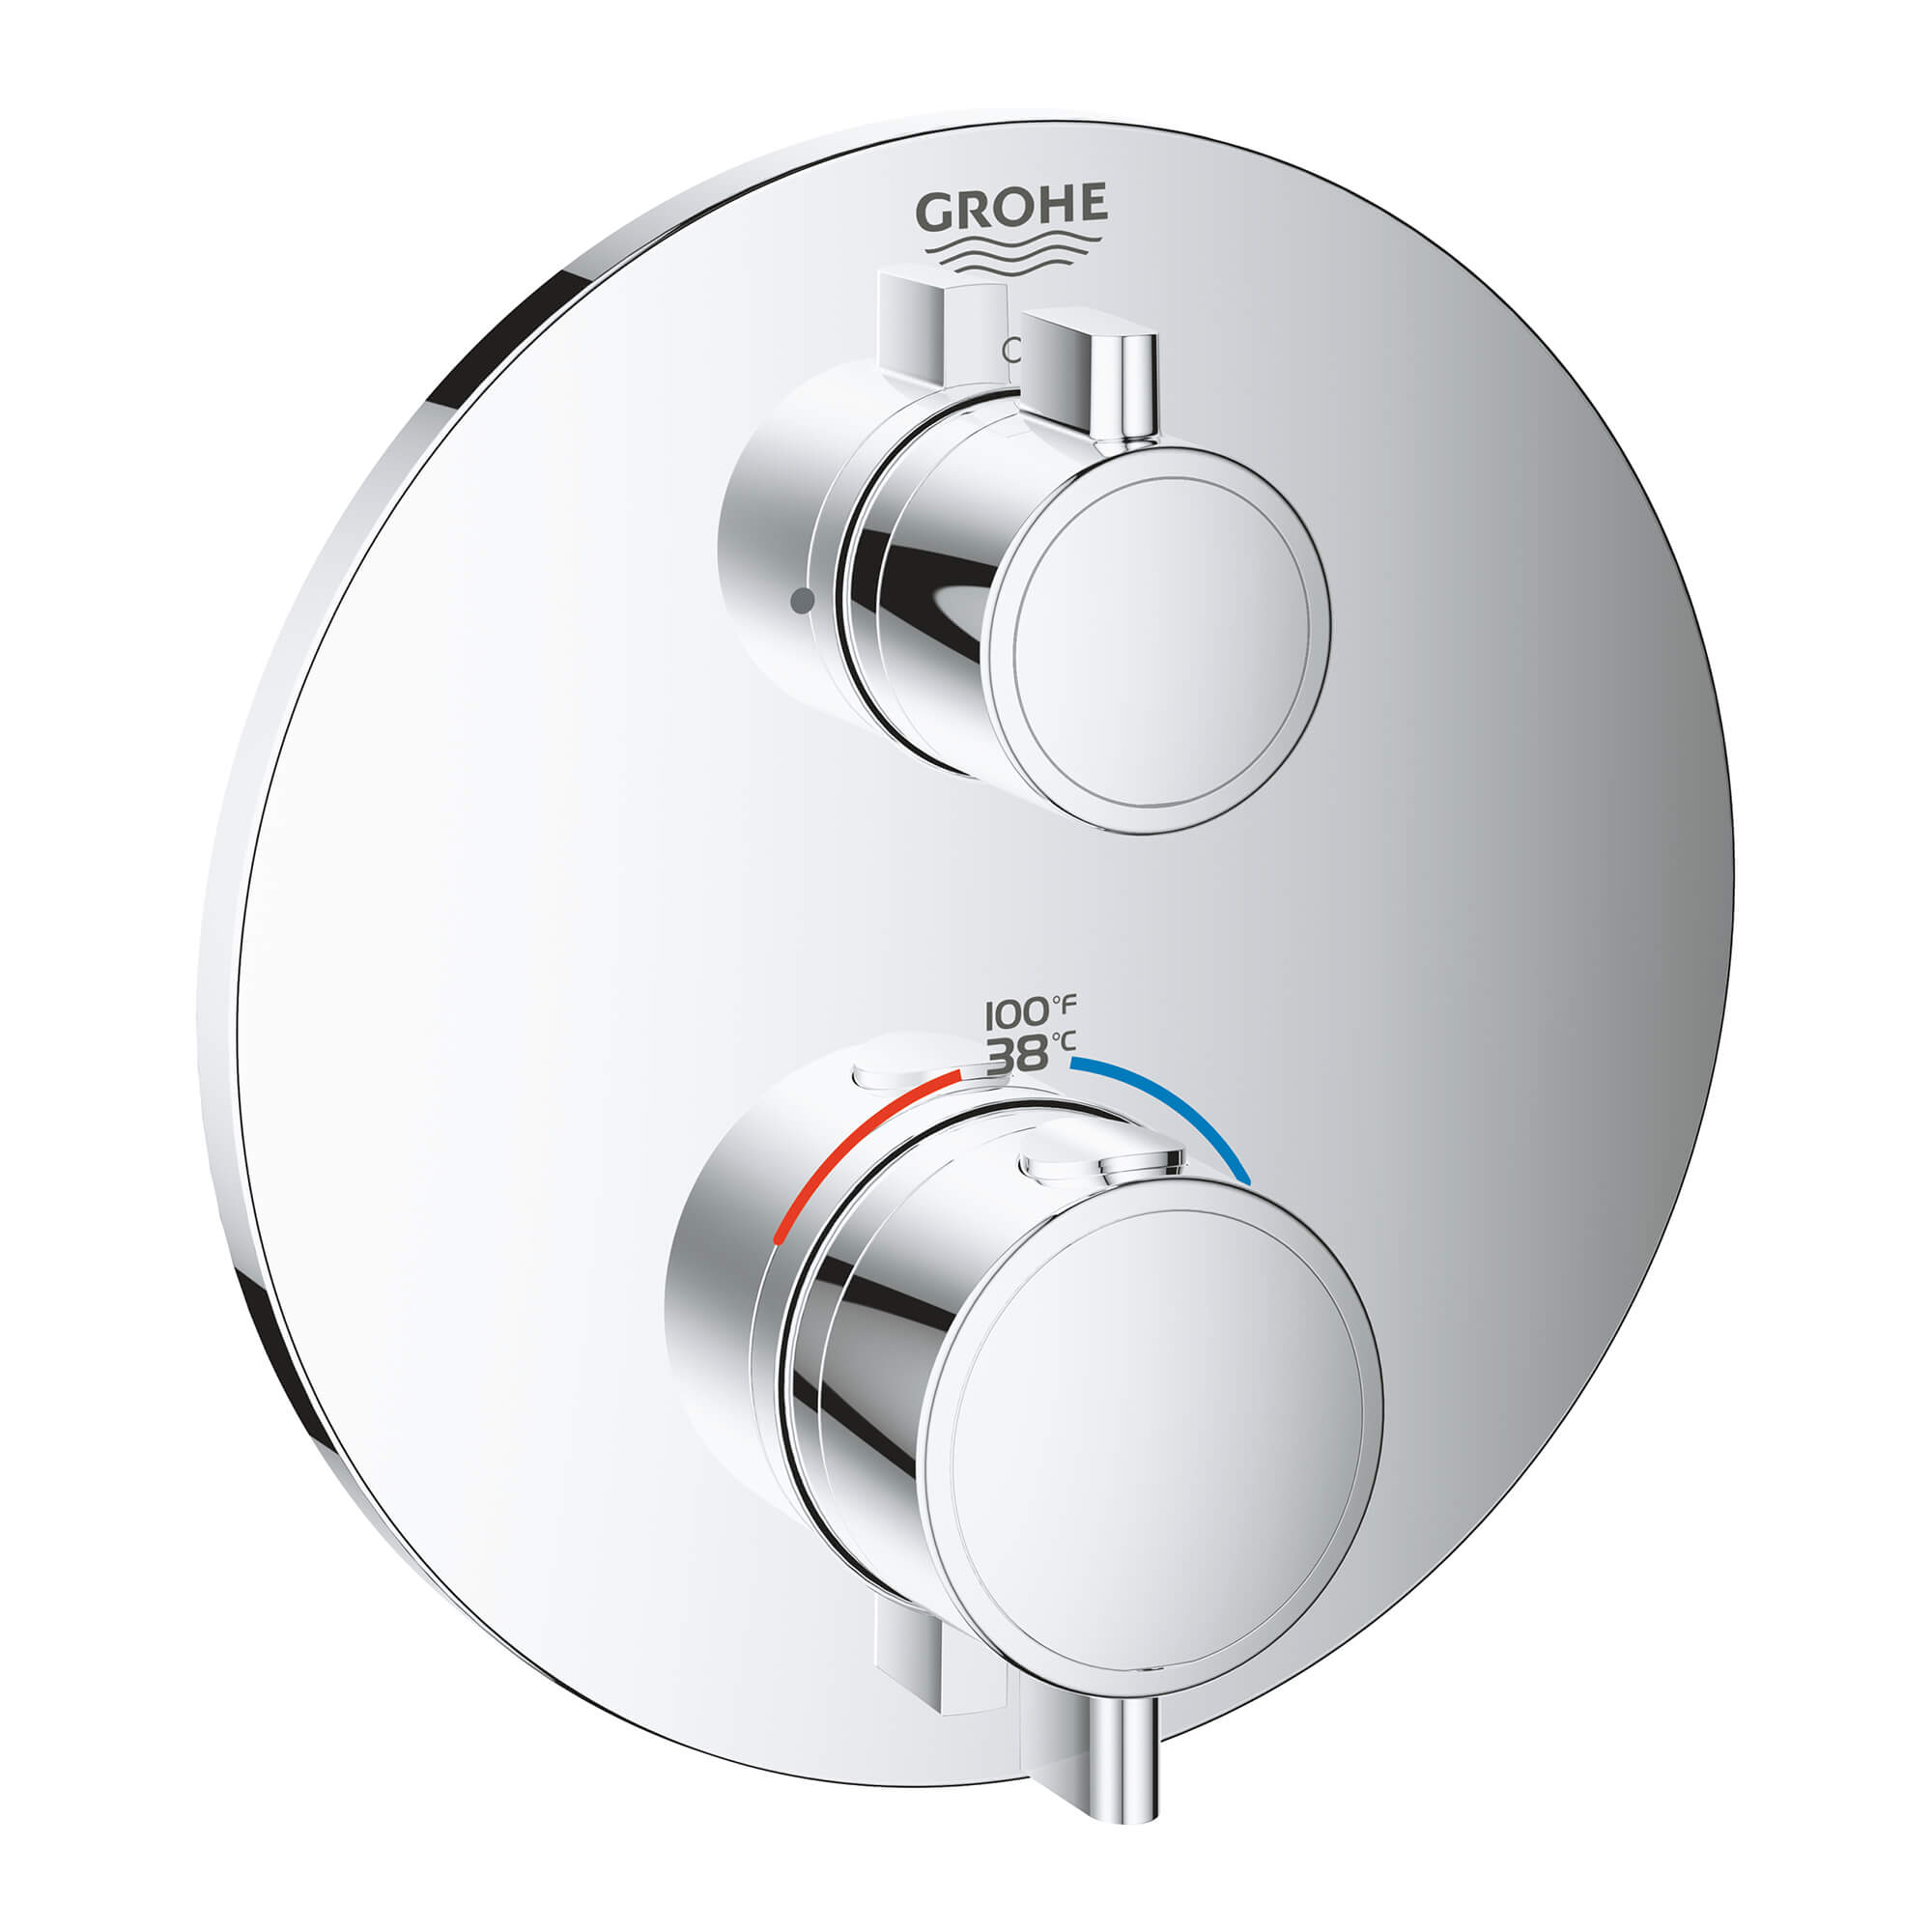 GROHE 13925000 Ball-Joint Flow Control